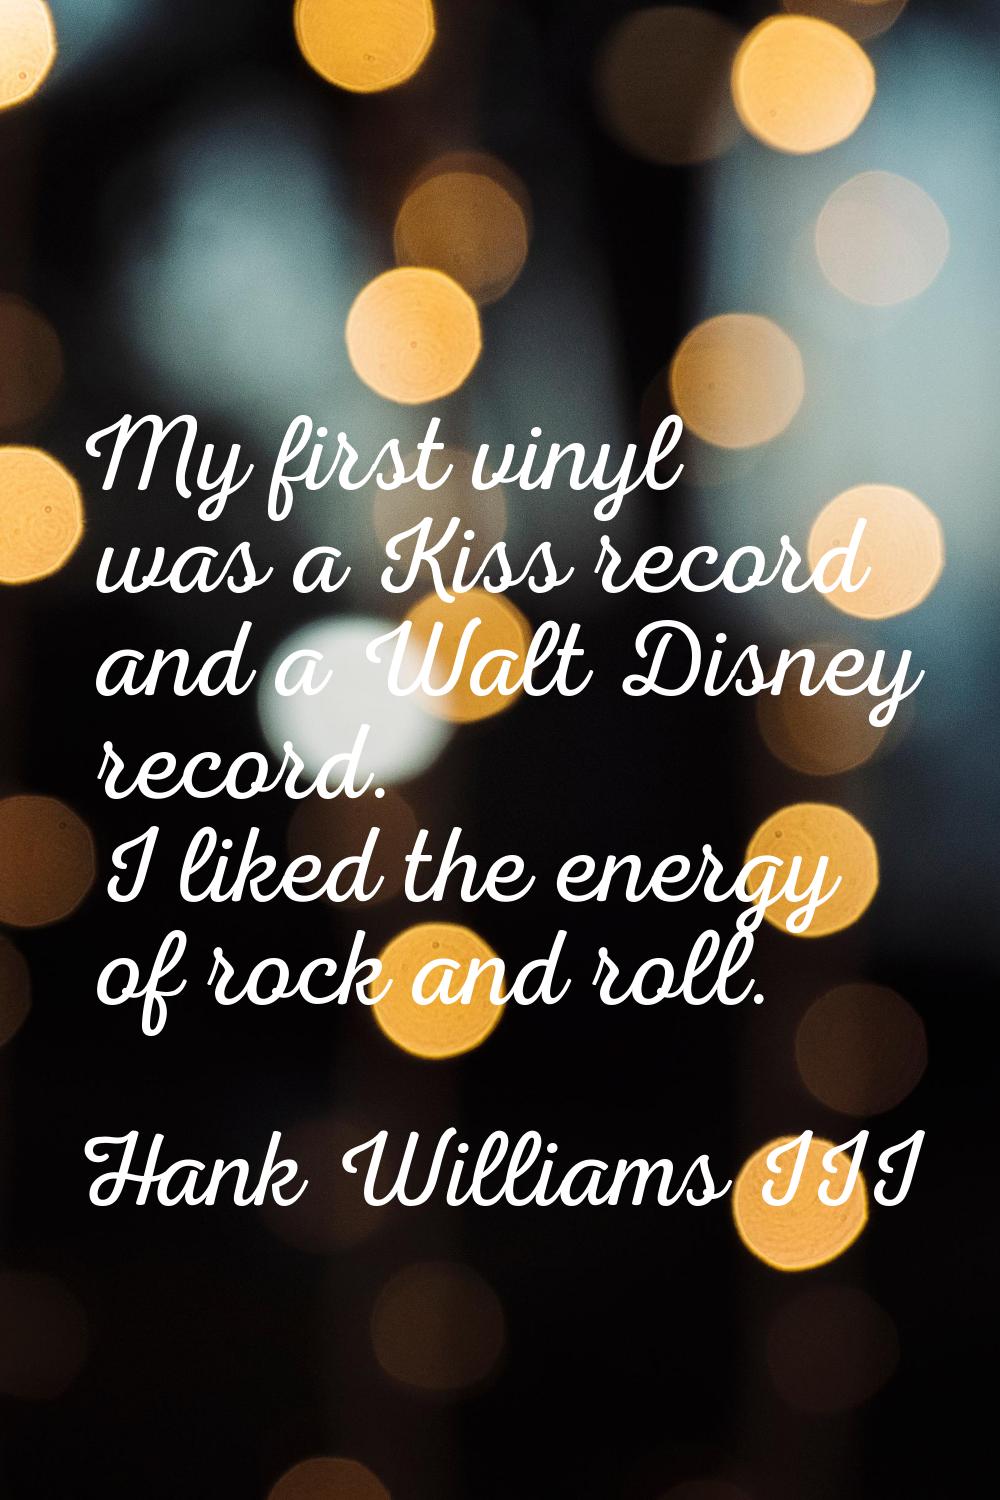 My first vinyl was a Kiss record and a Walt Disney record. I liked the energy of rock and roll.